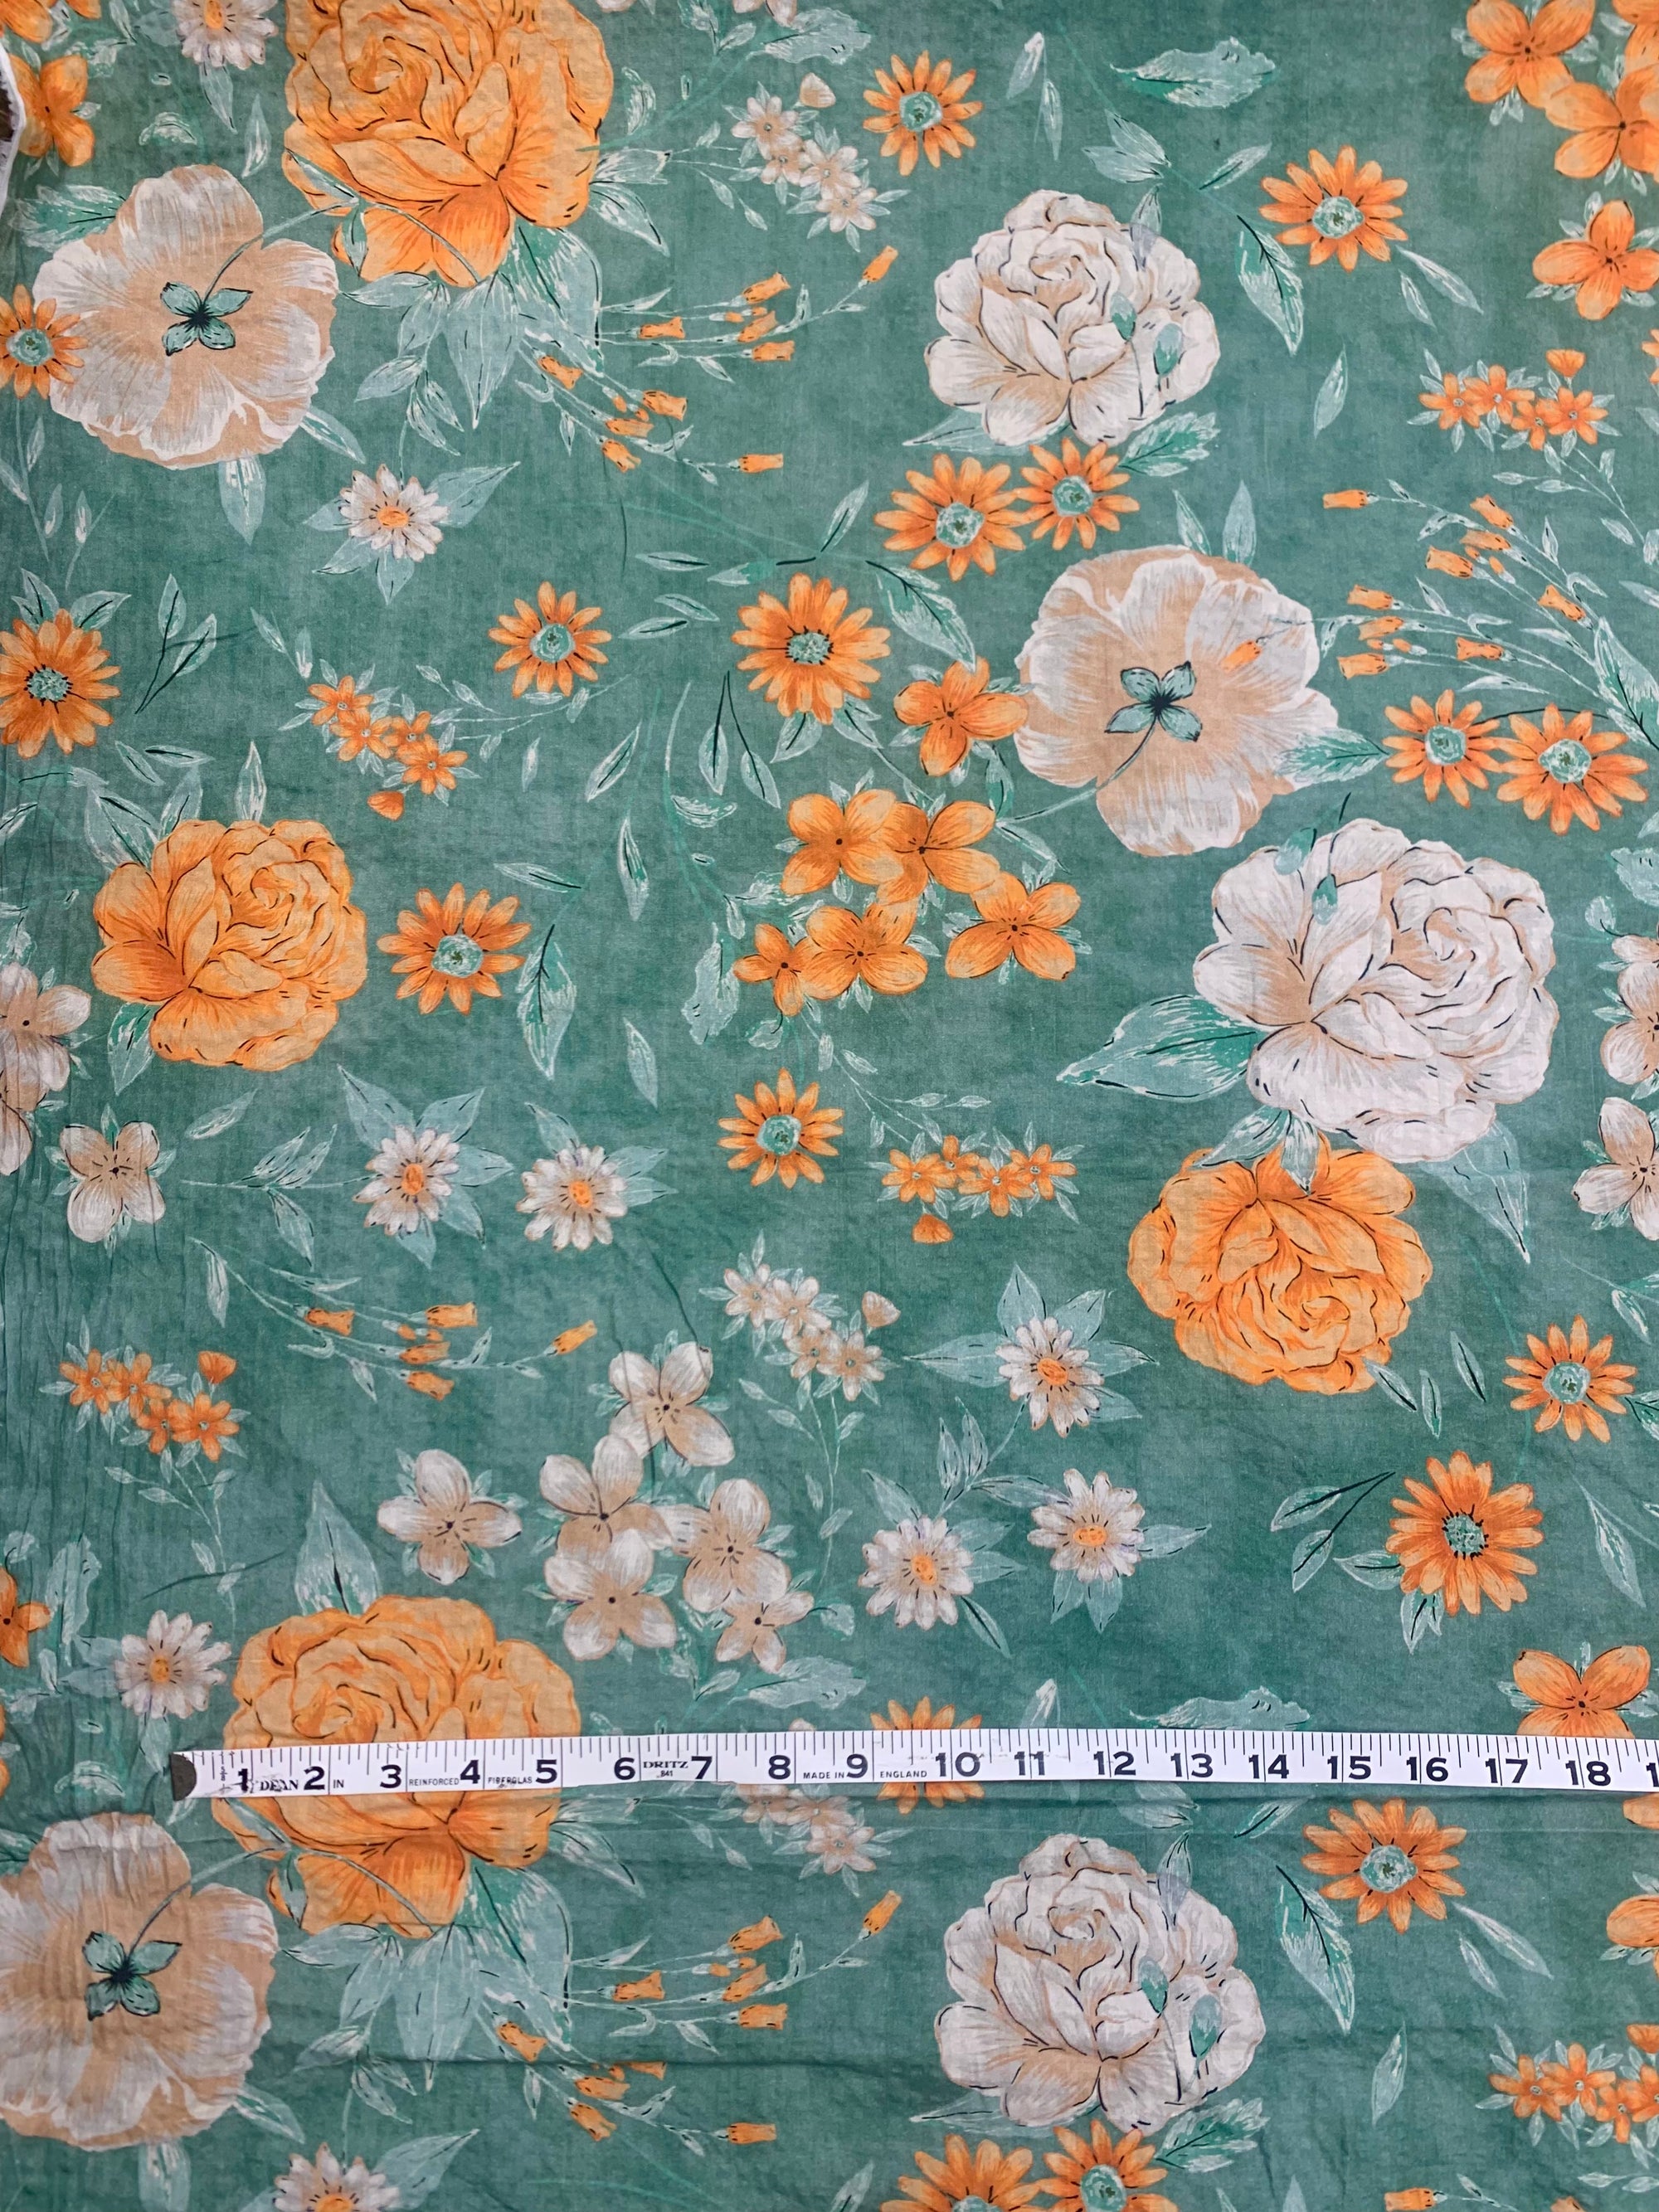 flat cotton seersucker with a muted green, orange and white floral print with measuring tape on top.